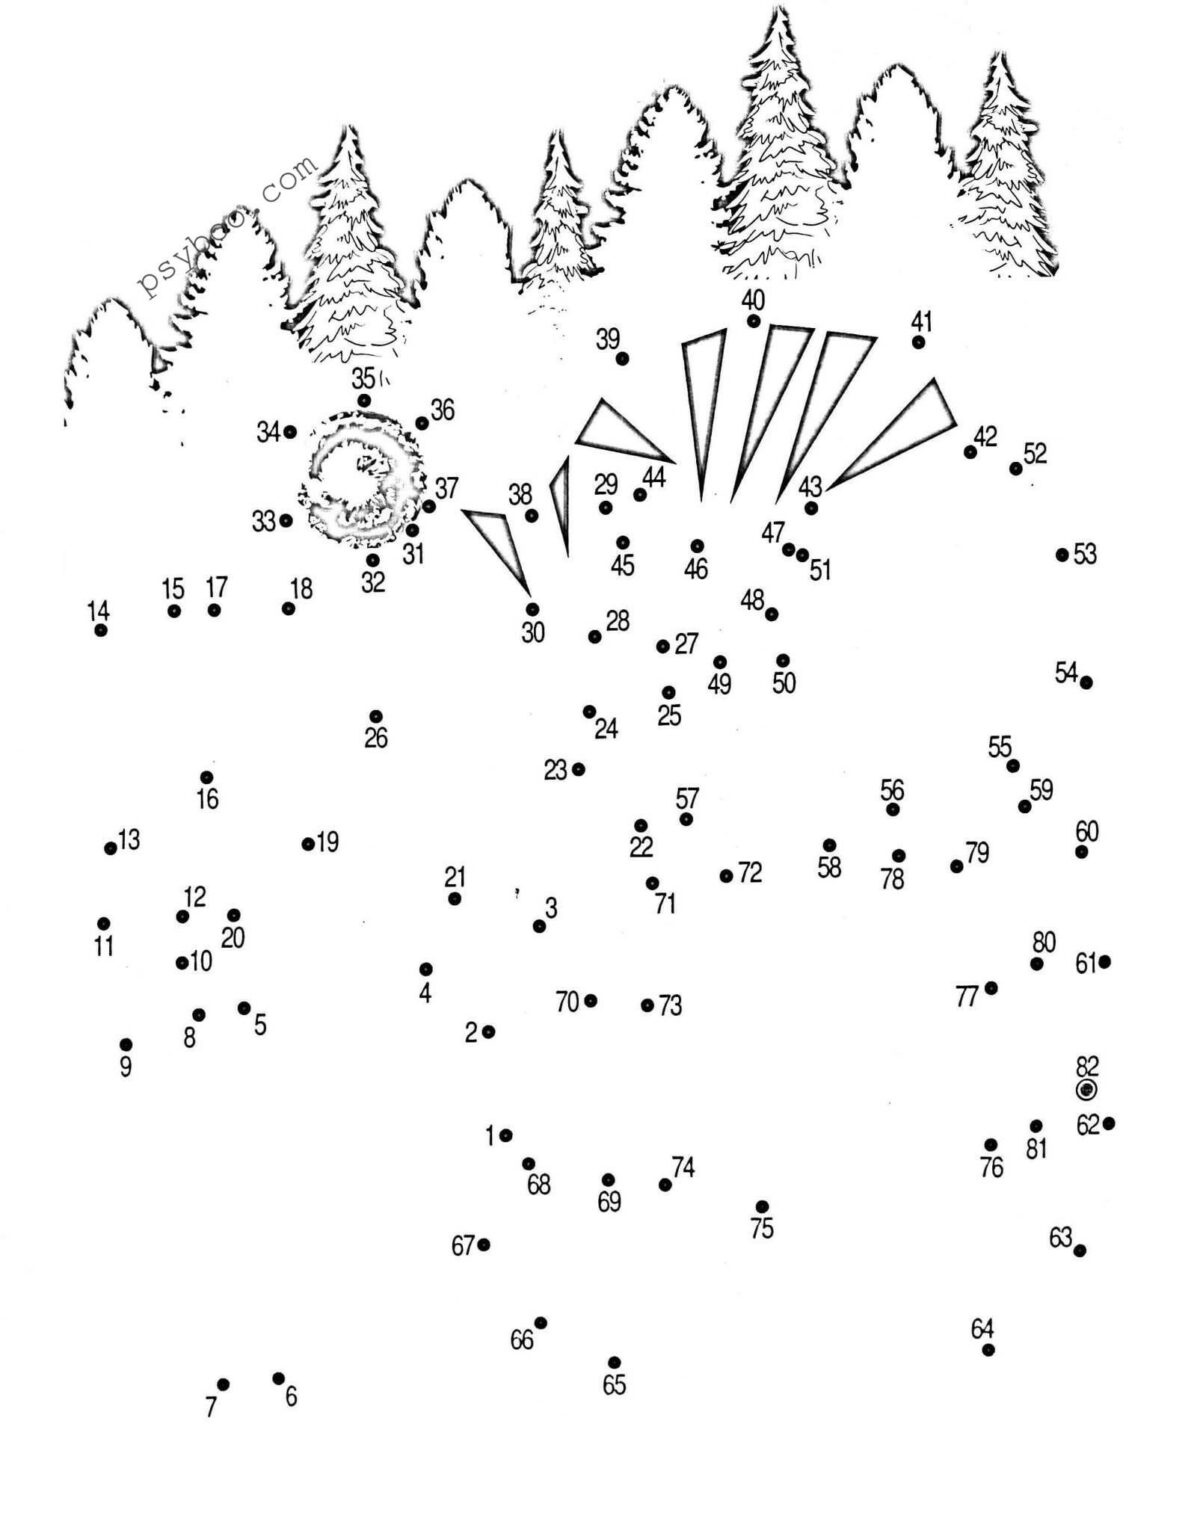 Hard Dot To Dot Puzzles From 1 100 Free Printable Download PDF 2020